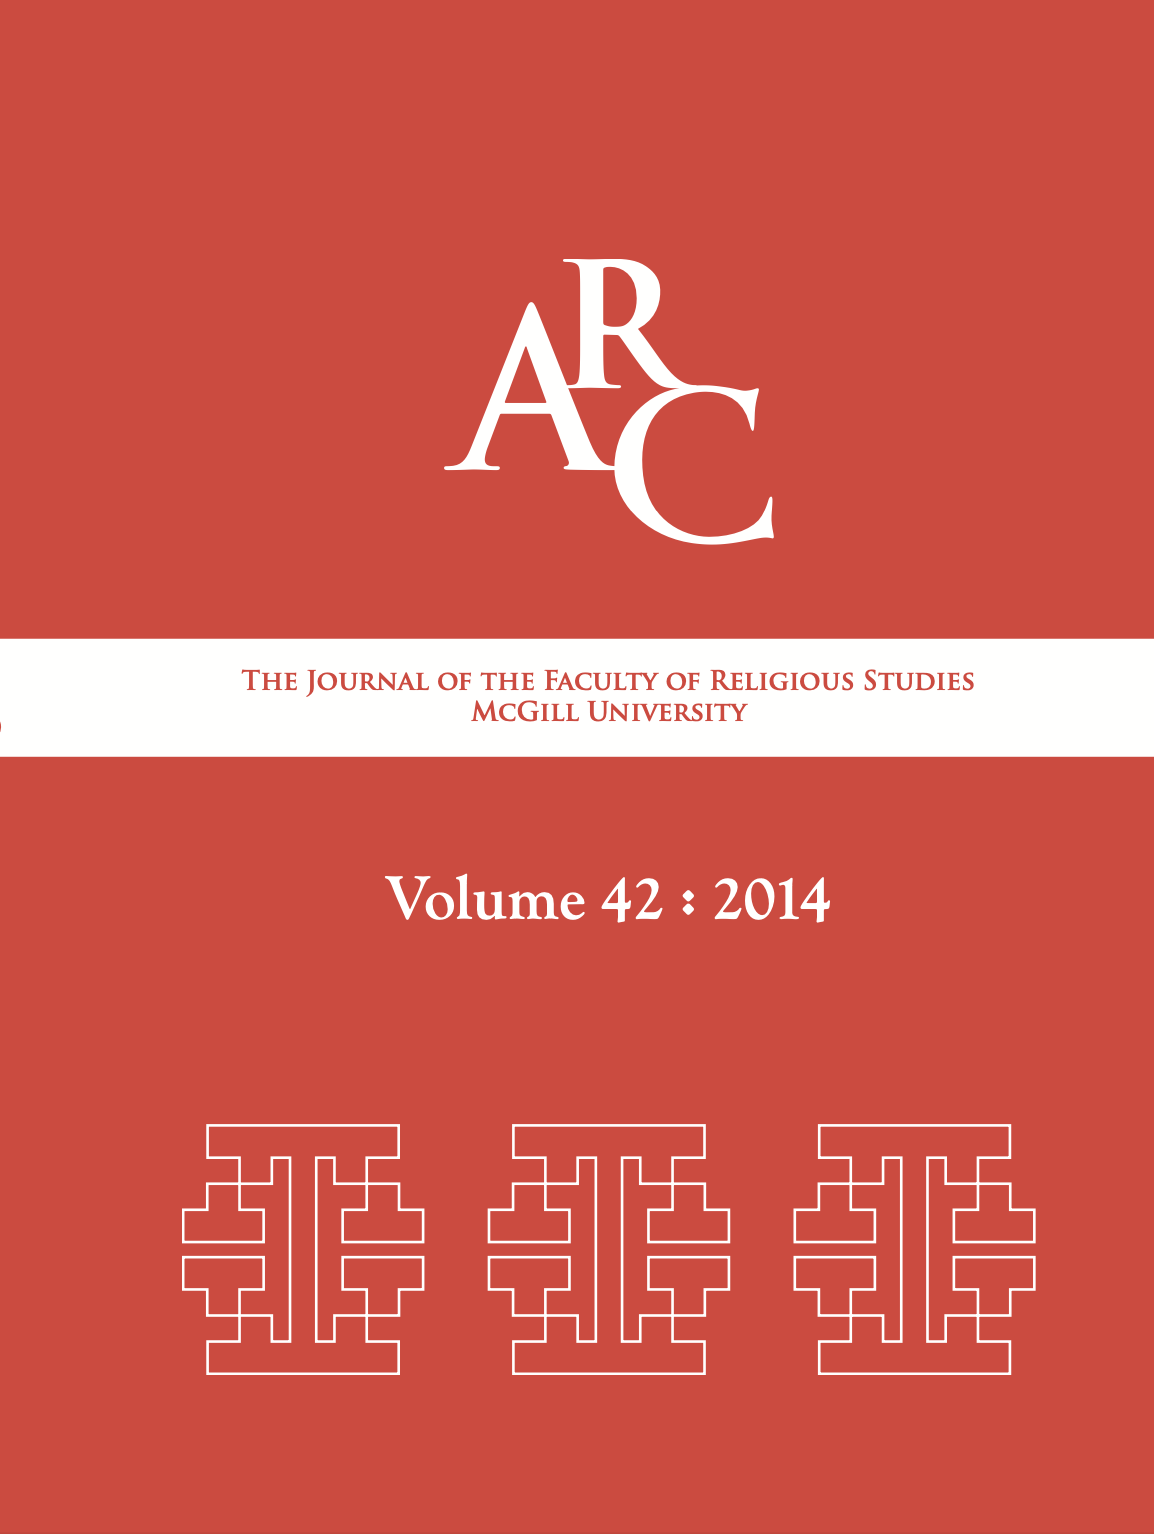 					View Vol. 42 (2014): Arc: The Journal of the Faculty of Religious Studies
				